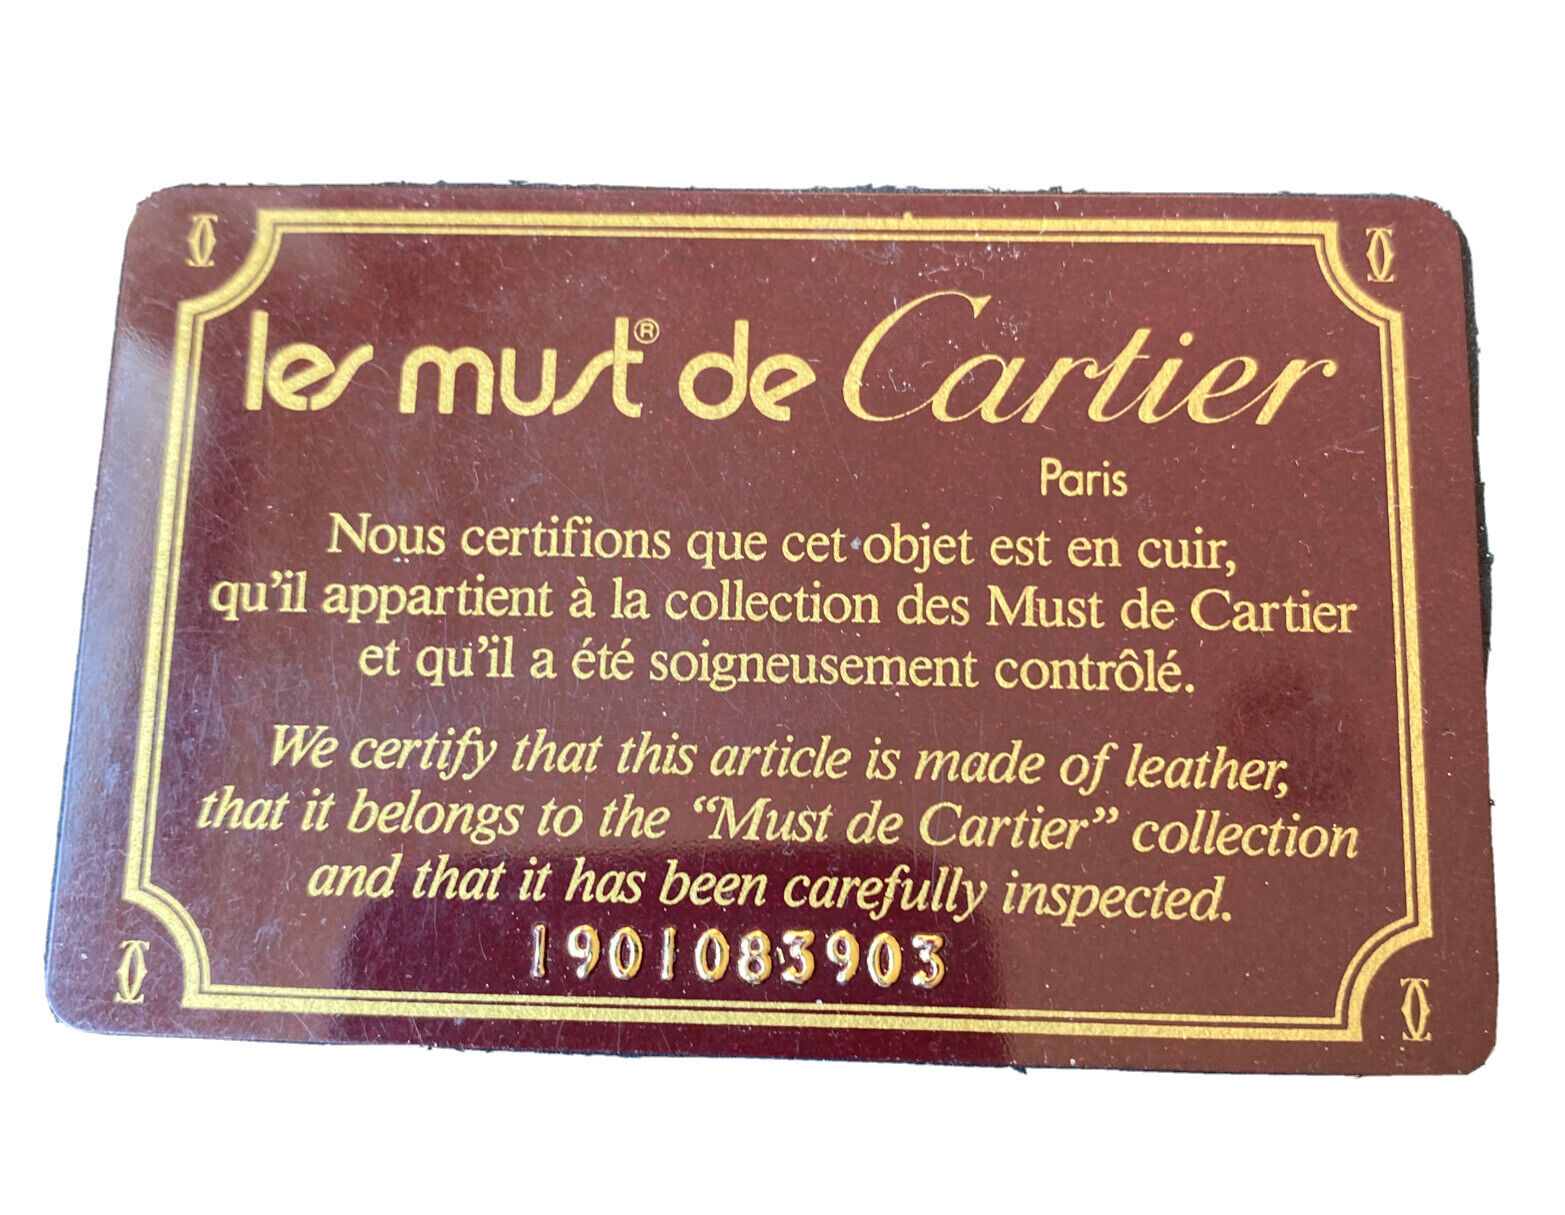 Les Must De Cartier leather Products Certificate Blank